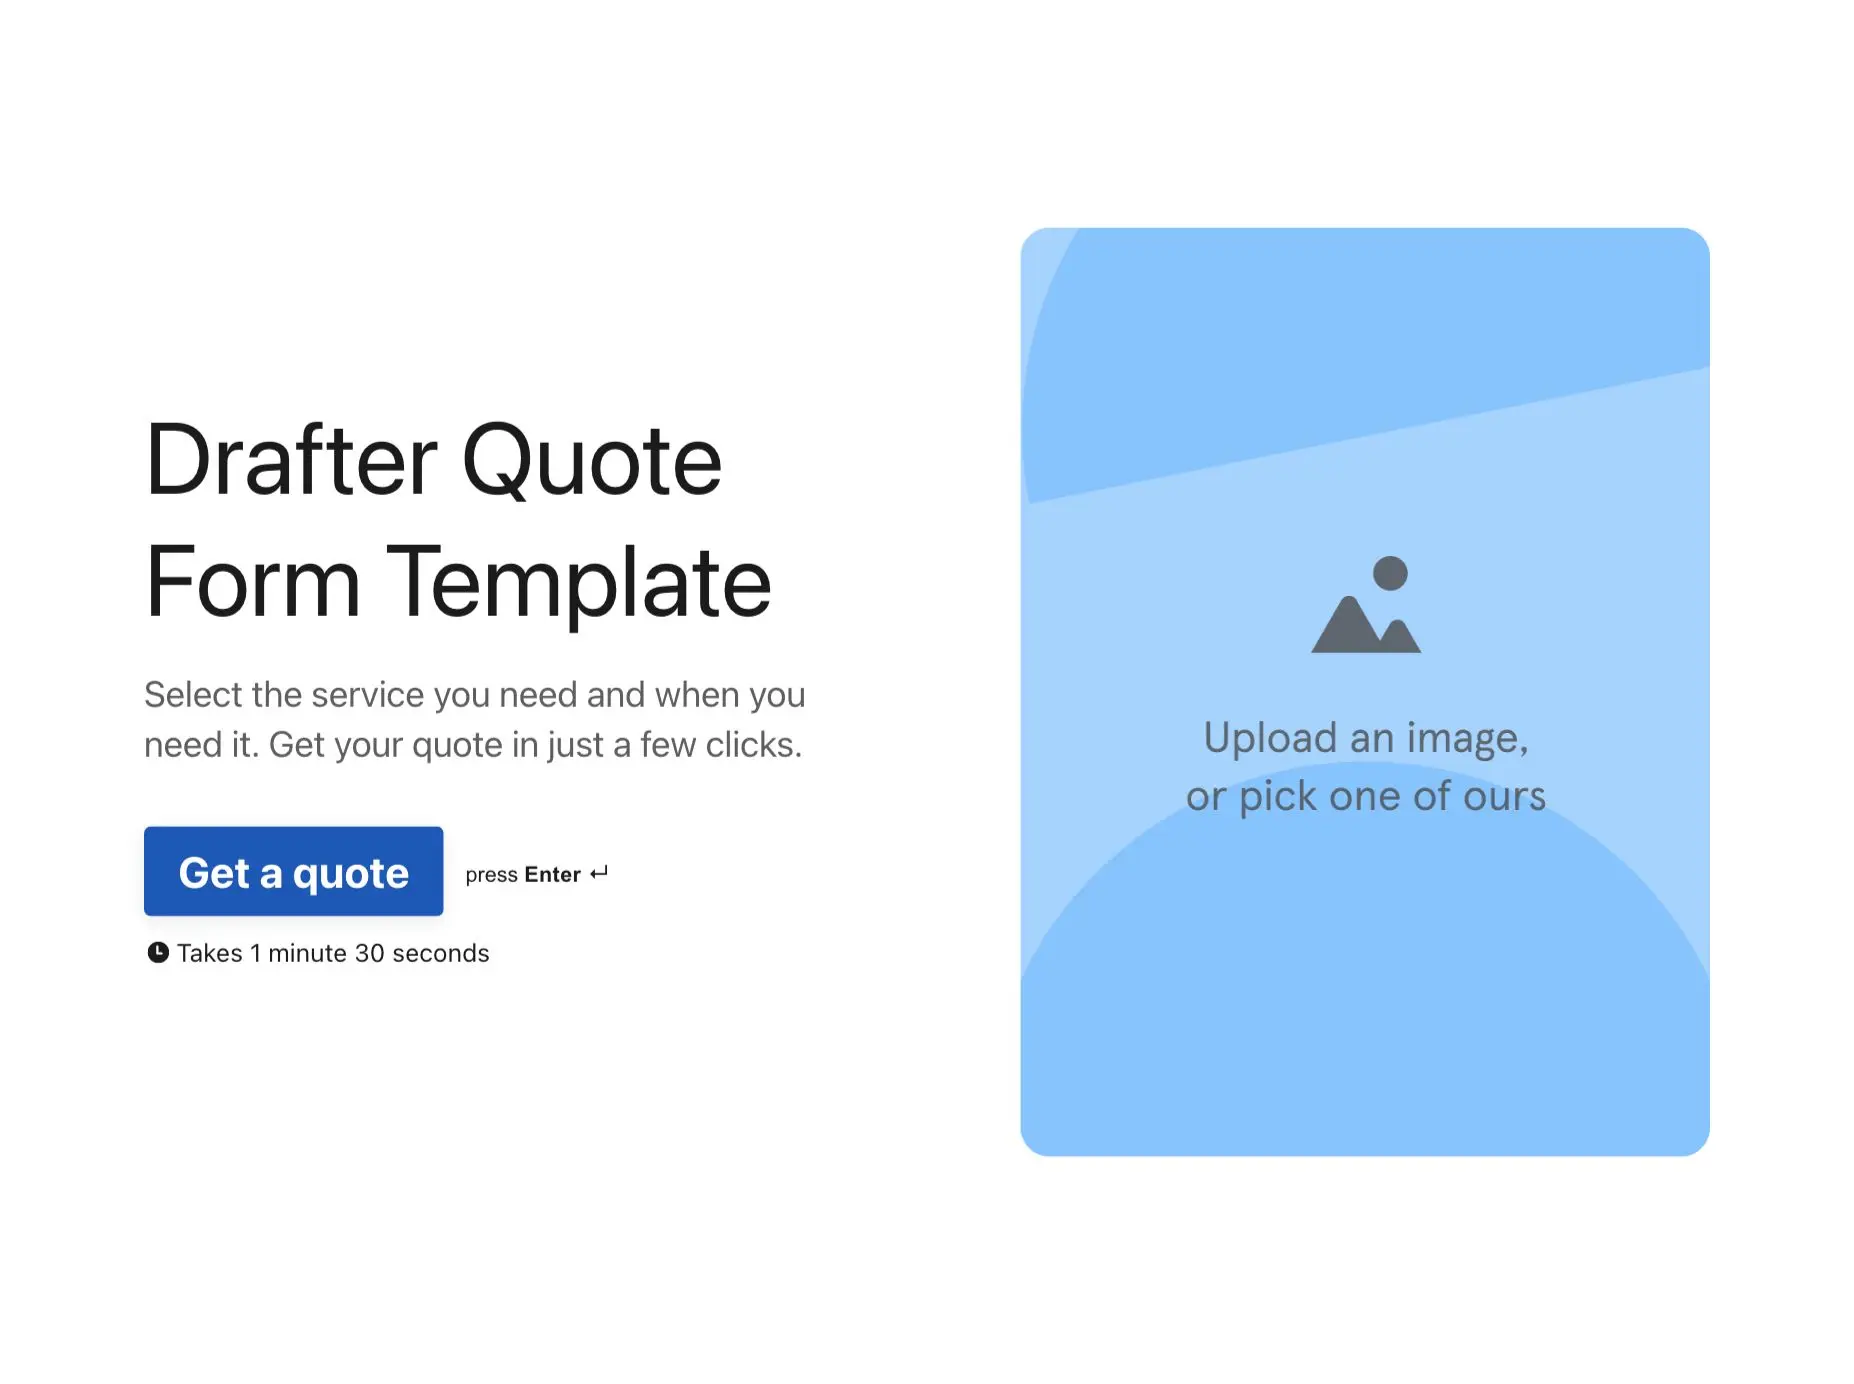 Drafter Quote Form Template Hero